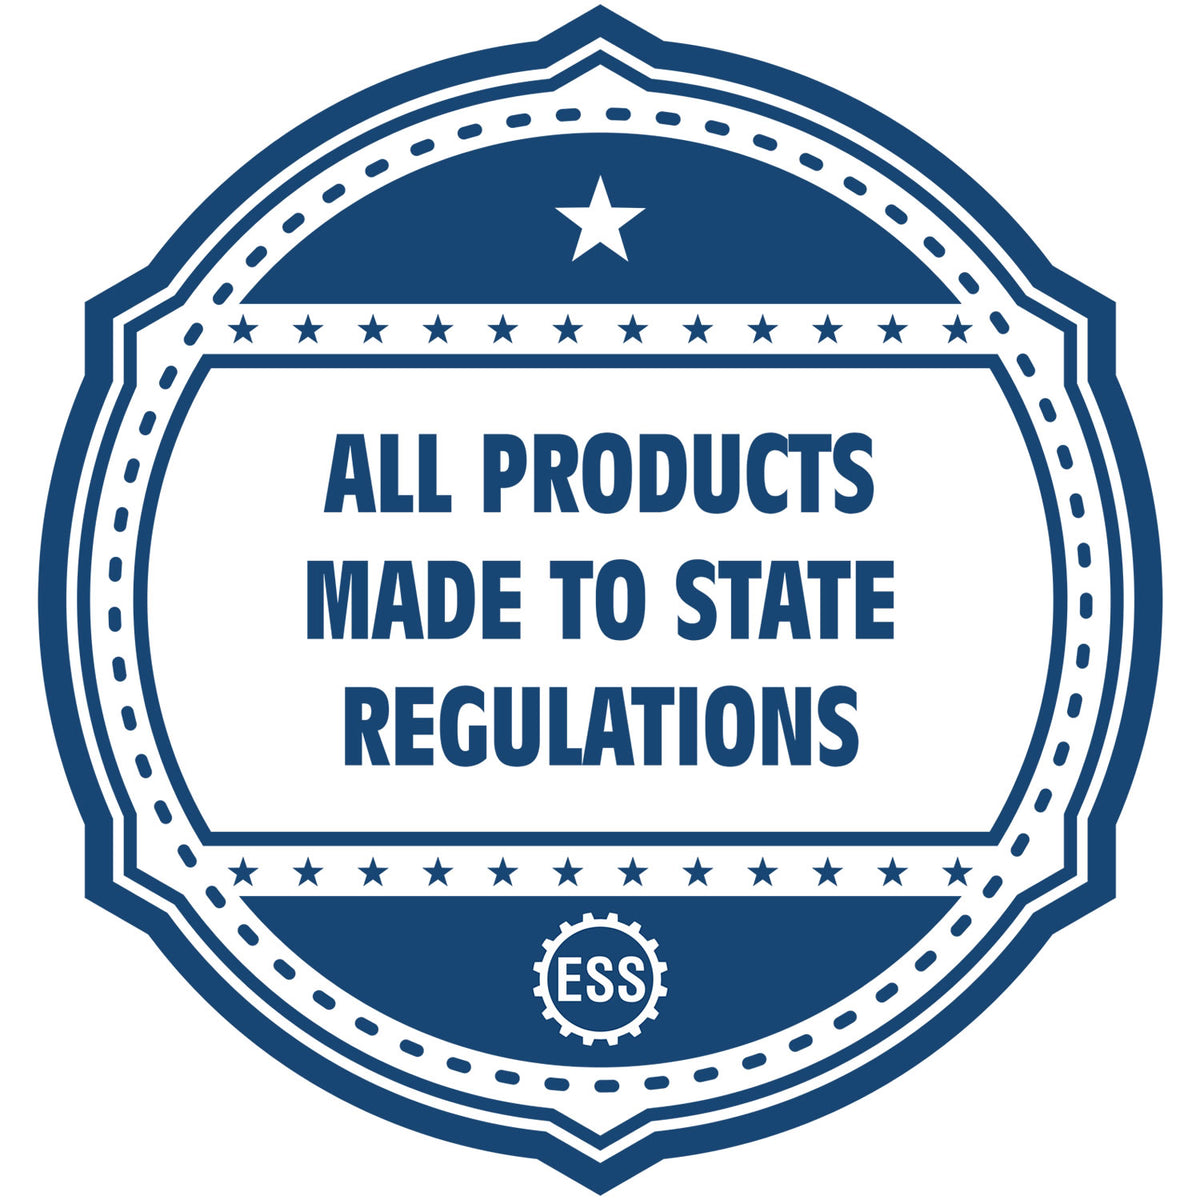 An icon or badge element for the Super Slim Georgia Notary Public Stamp showing that this product is made in compliance with state regulations.